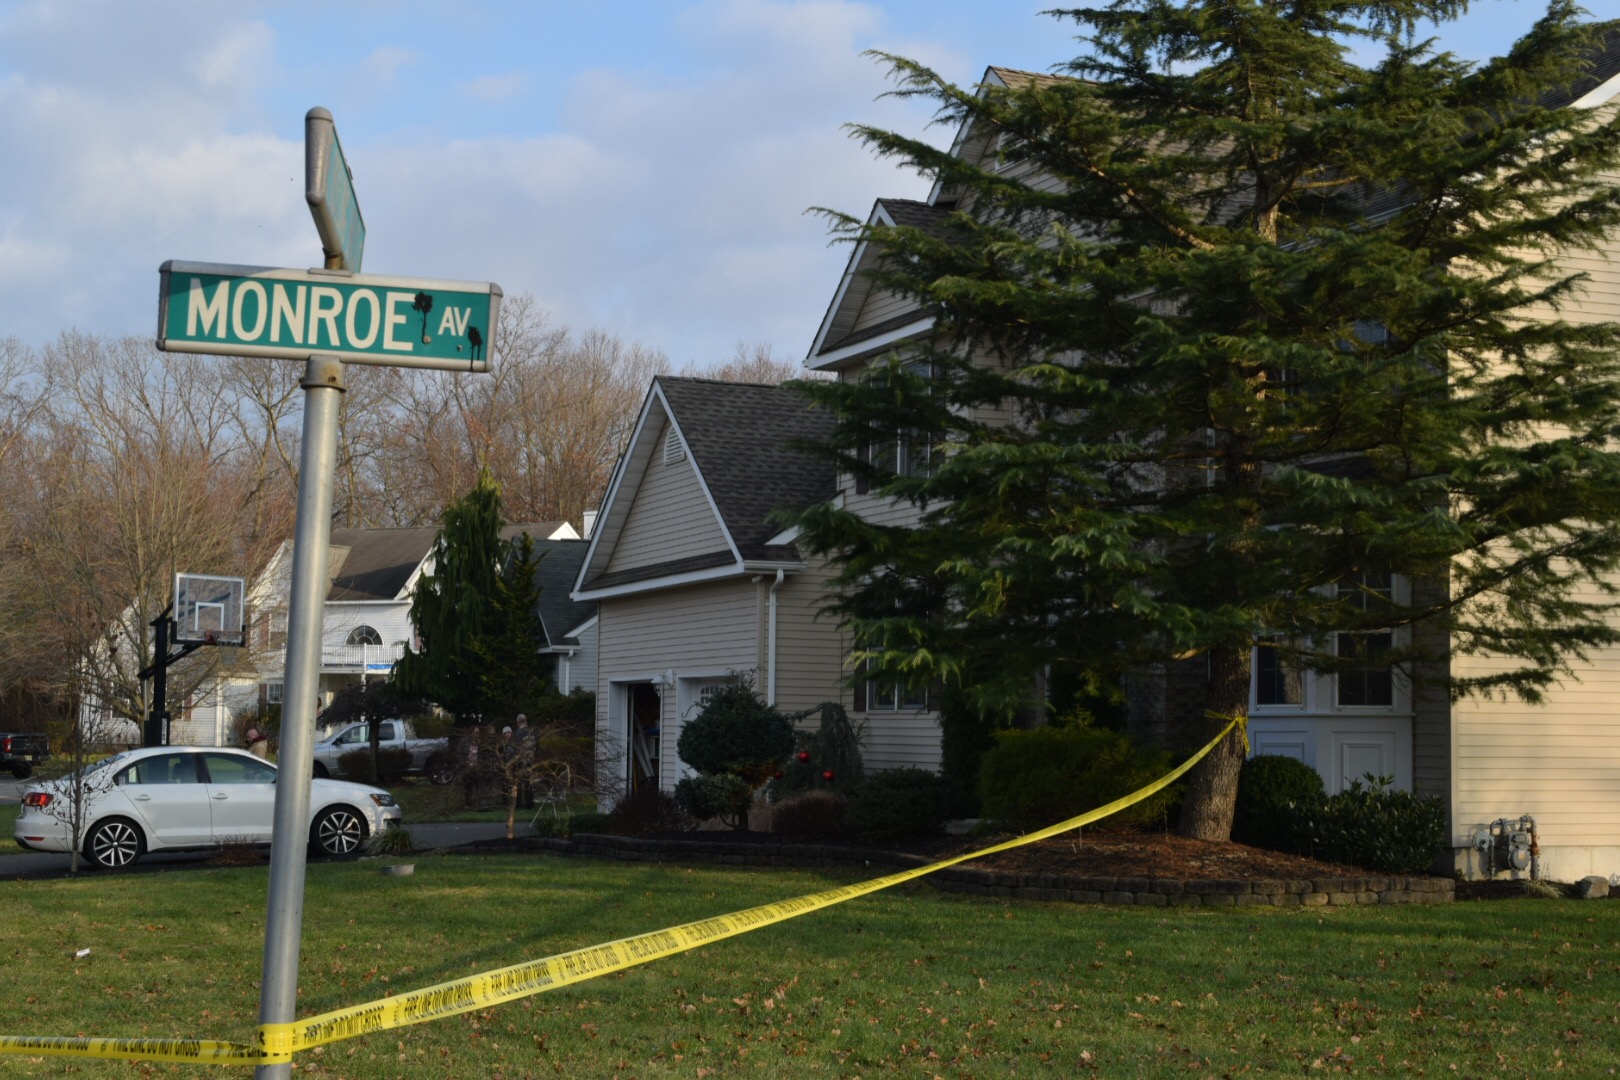 Police caution tape surrounding a home where a fire was reported, Dec. 13, 2018. (Photo: Daniel Nee)